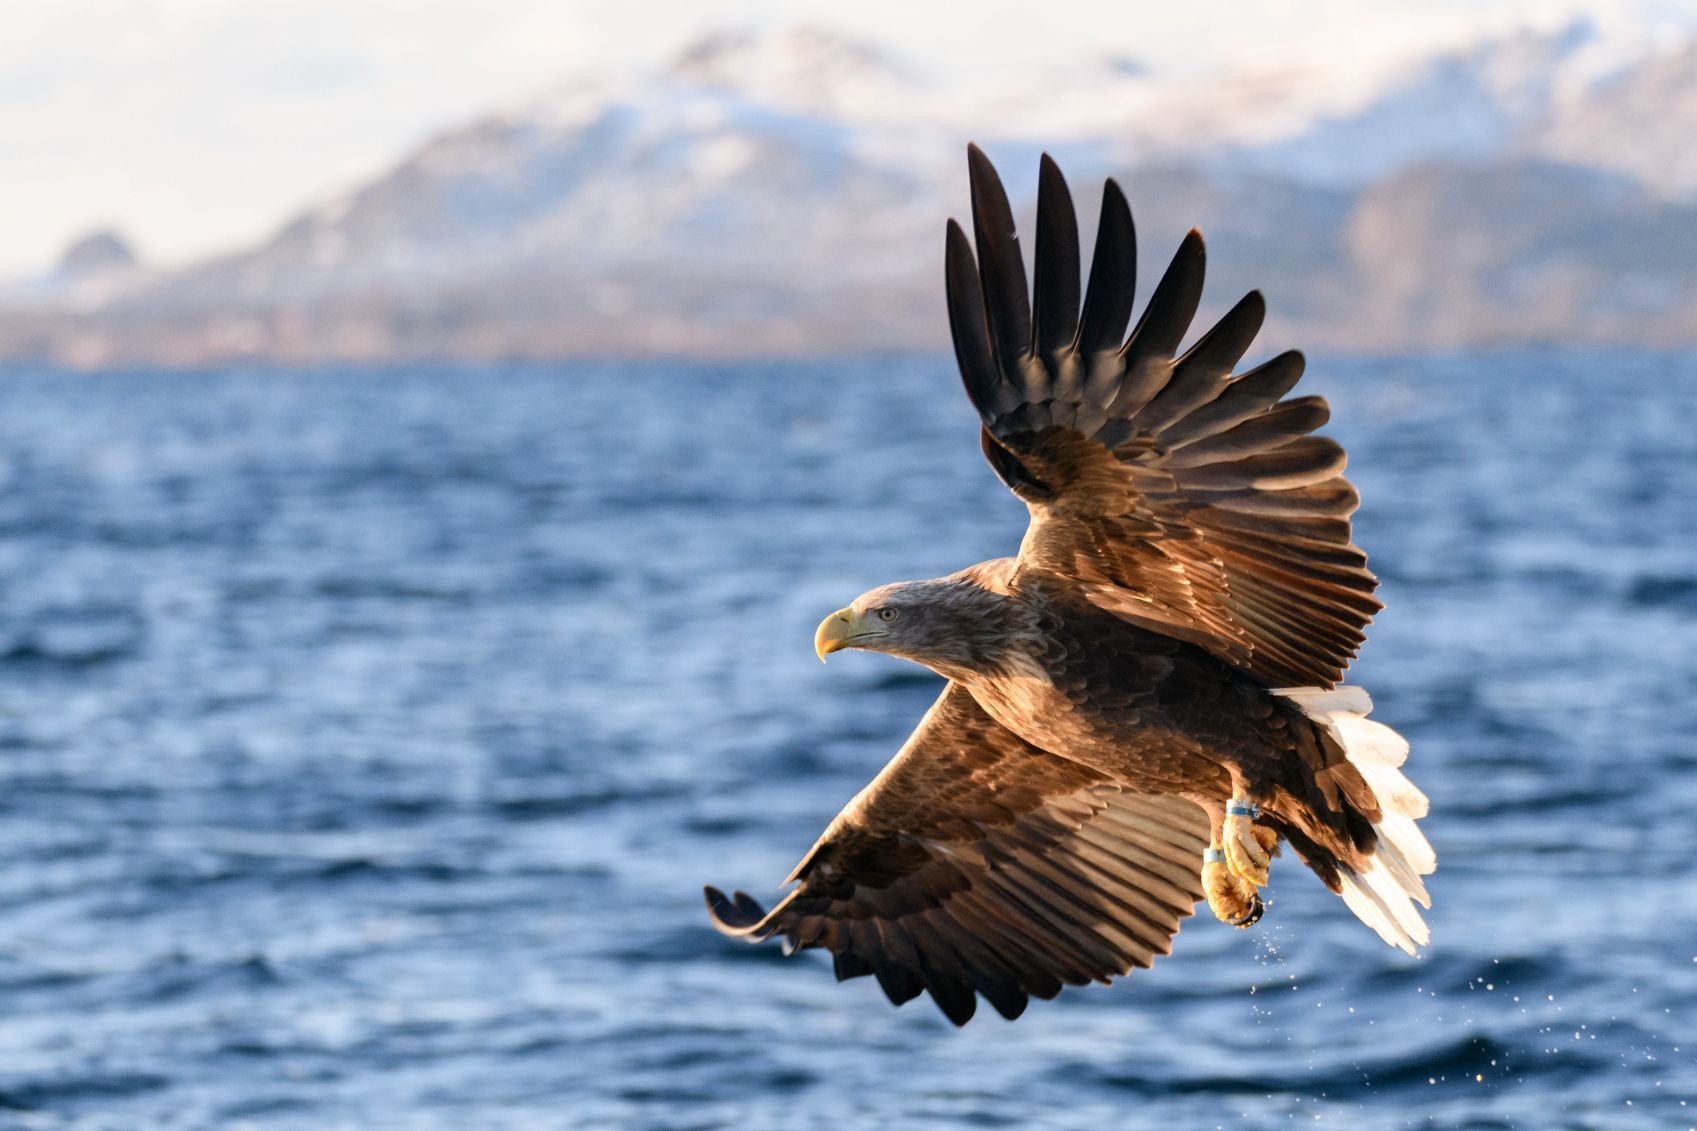 A white-tailed eagle or sea eagle (Haliaeetus albicilla) hunting in the sky over a fjord near Vesteralen island in Northern Norway.